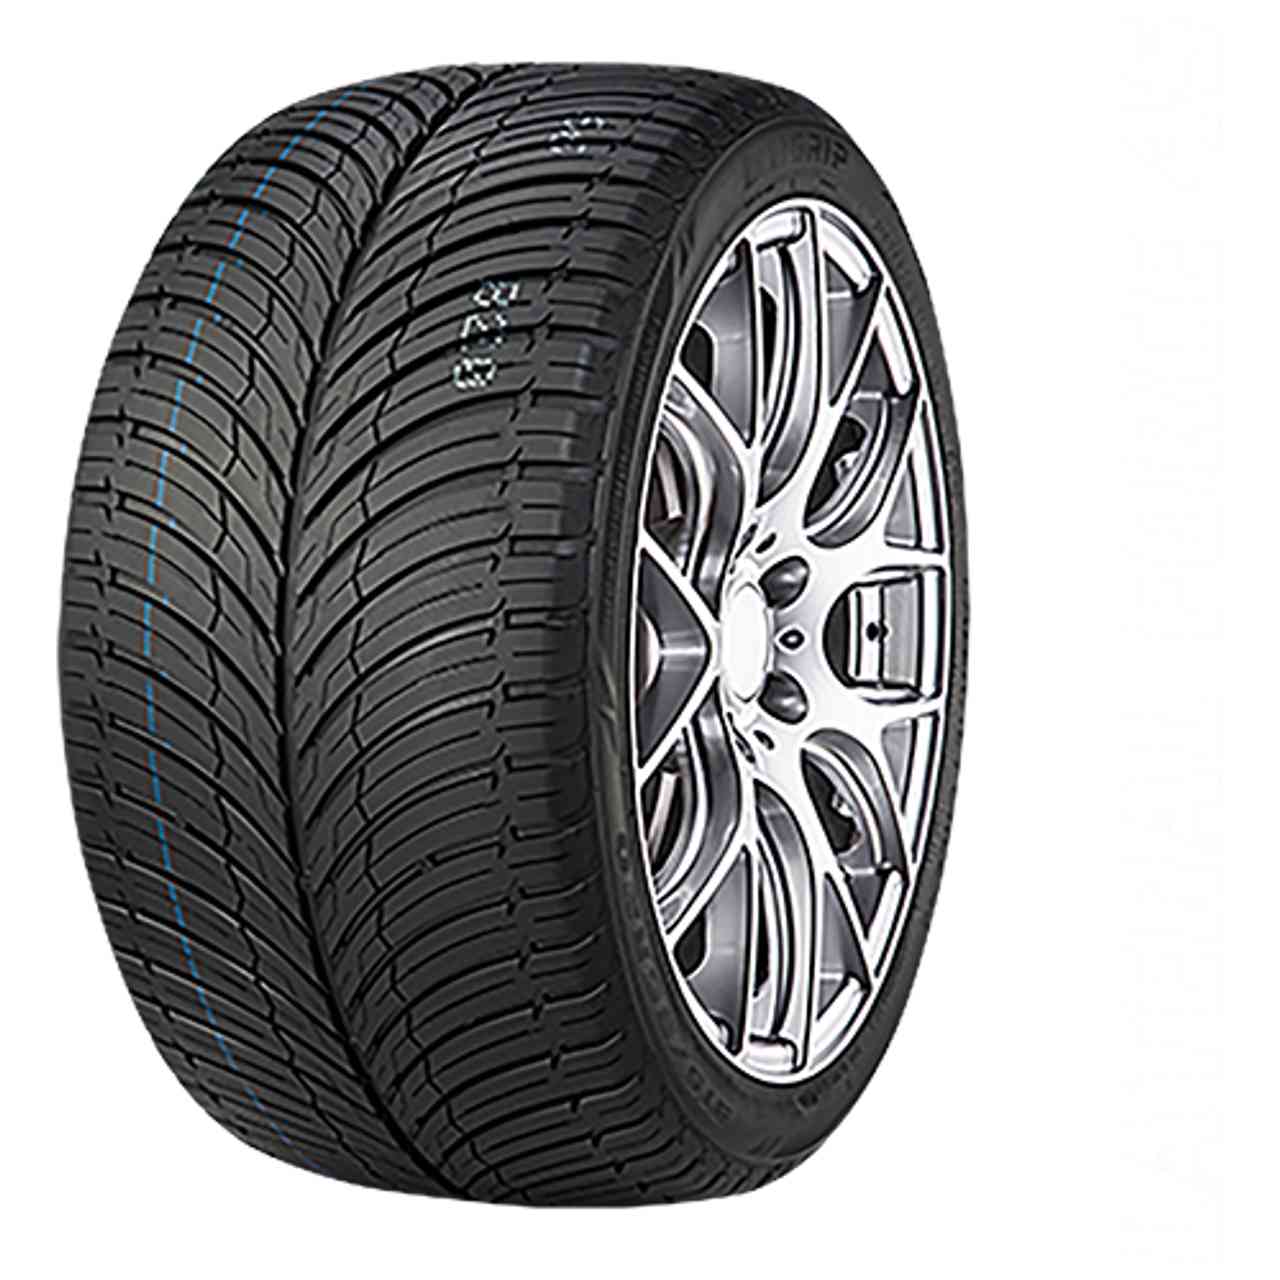 UNIGRIP LATERAL FORCE 4S 235/45R19 99W BSW XL